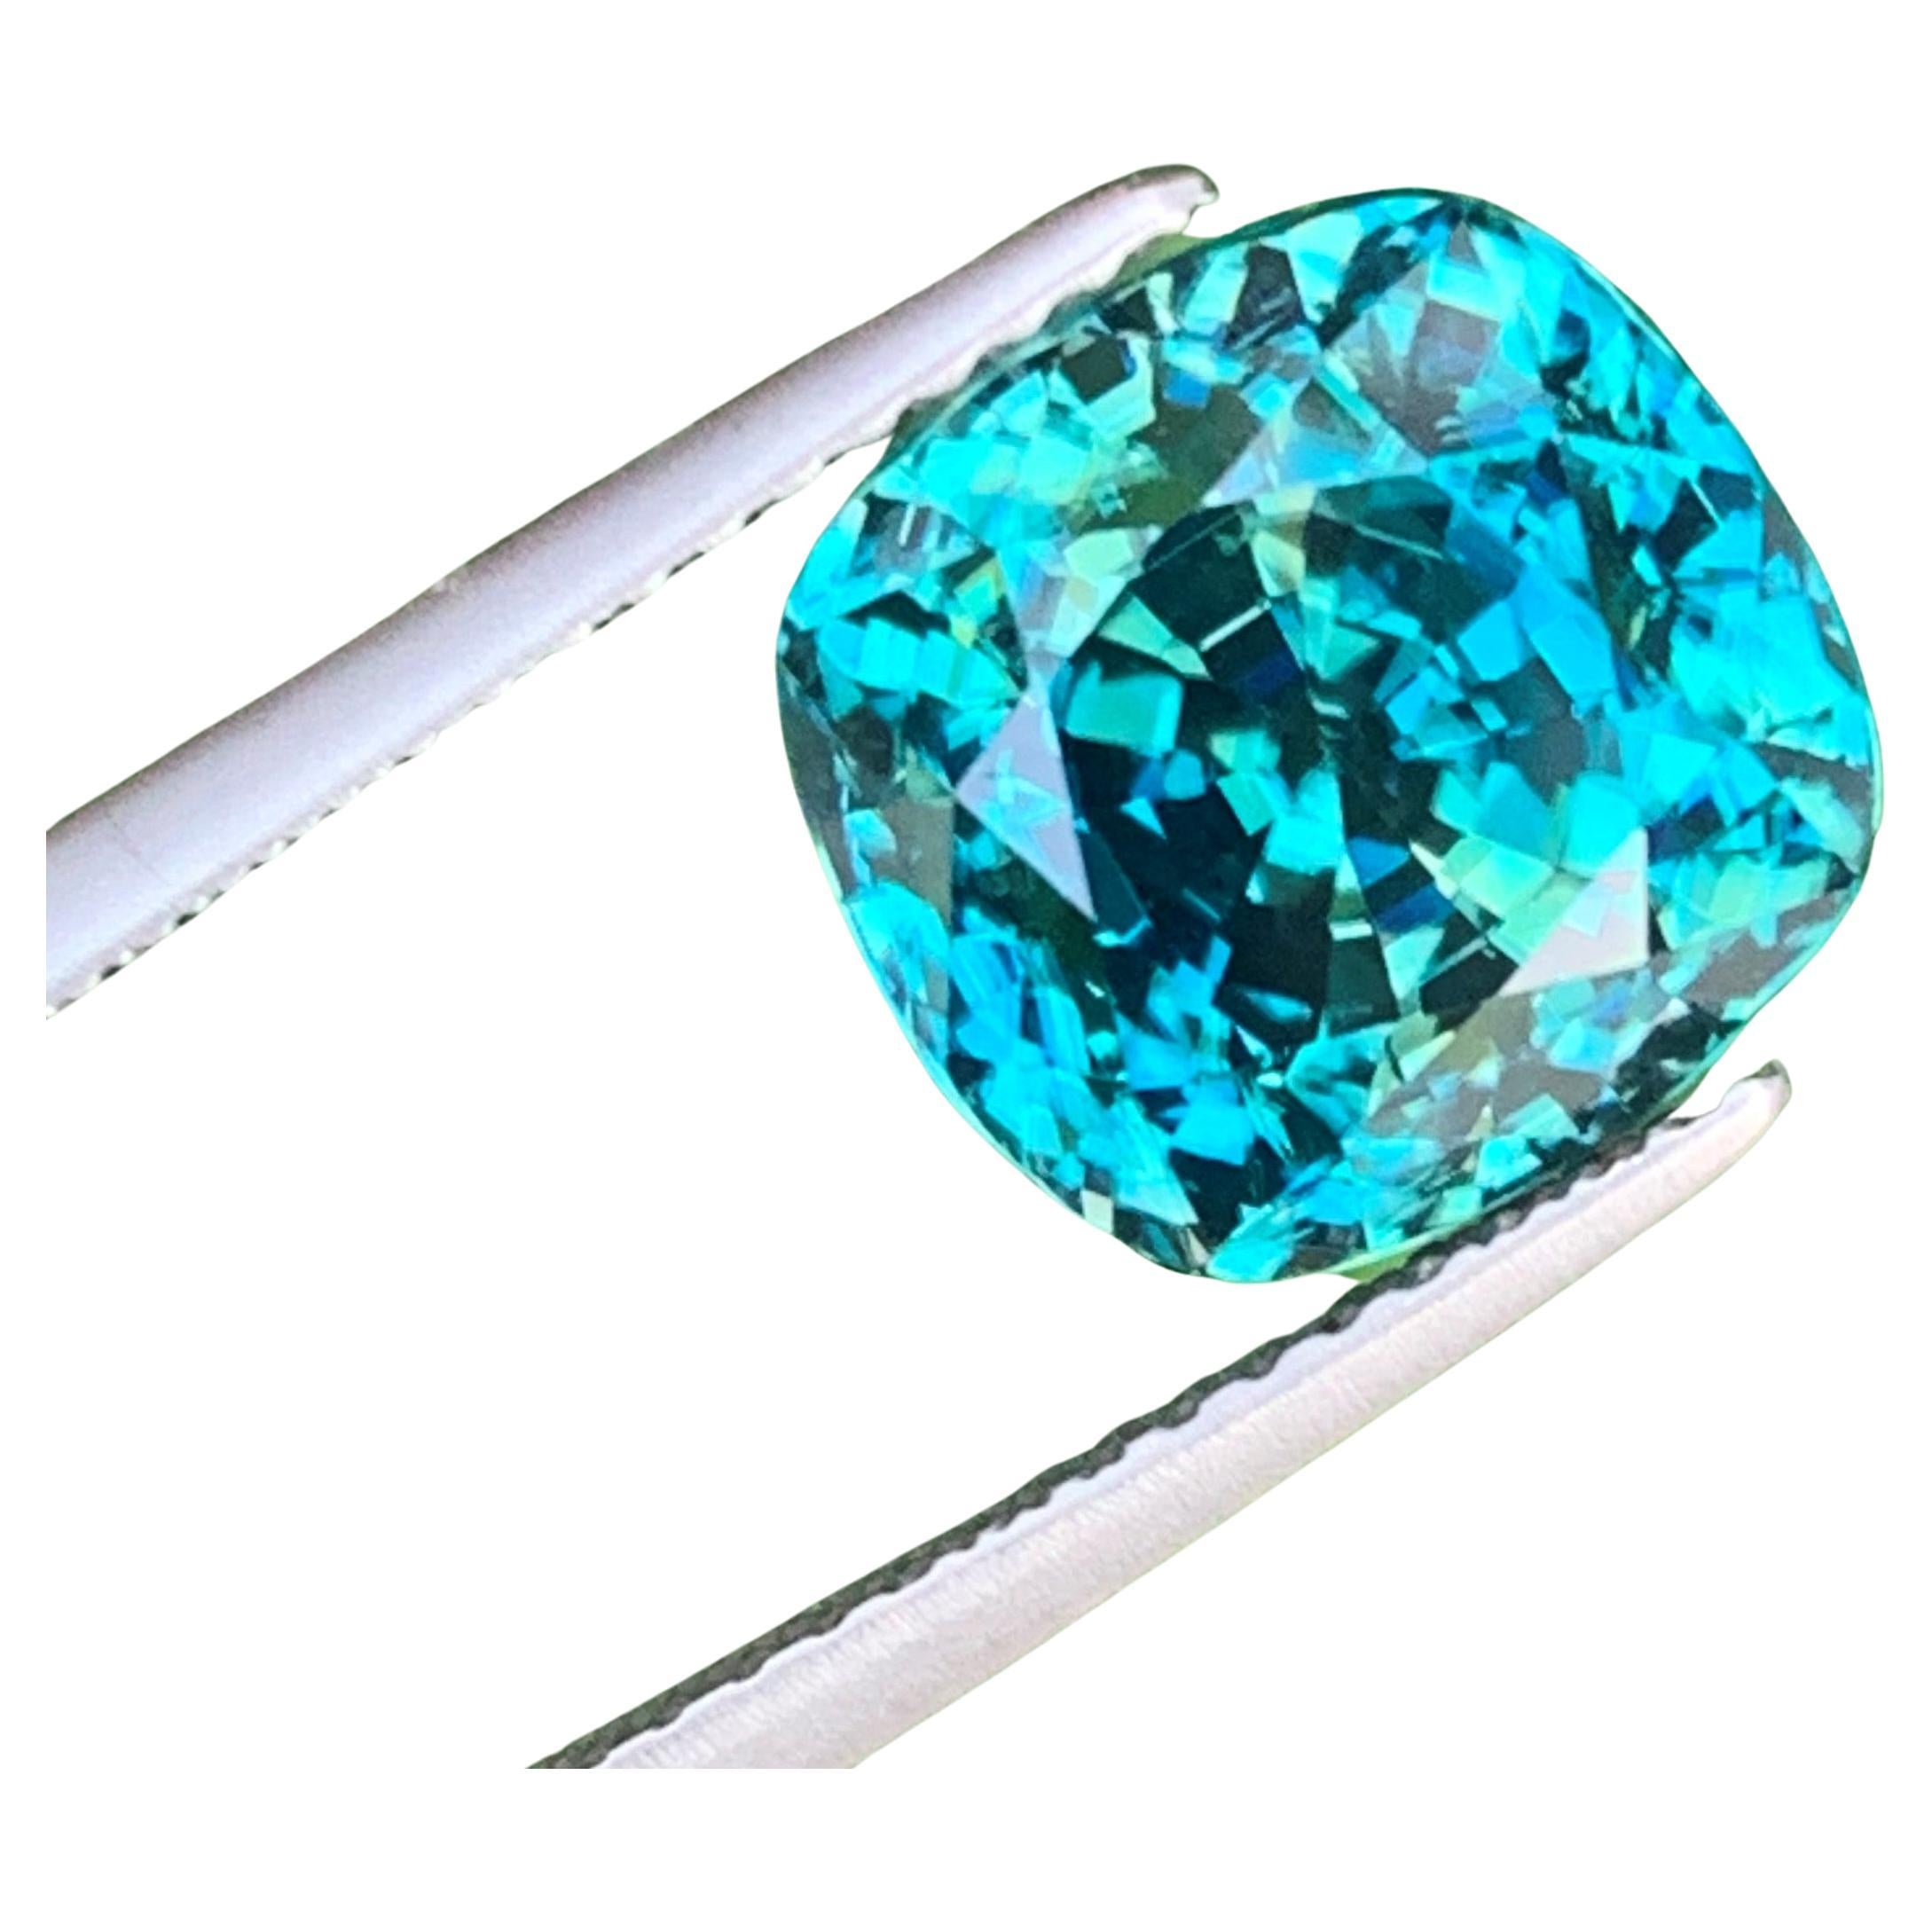 8.55 Carat Majestic Natural Loose Blue Zircon From Cambodia For Jewelry Making For Sale